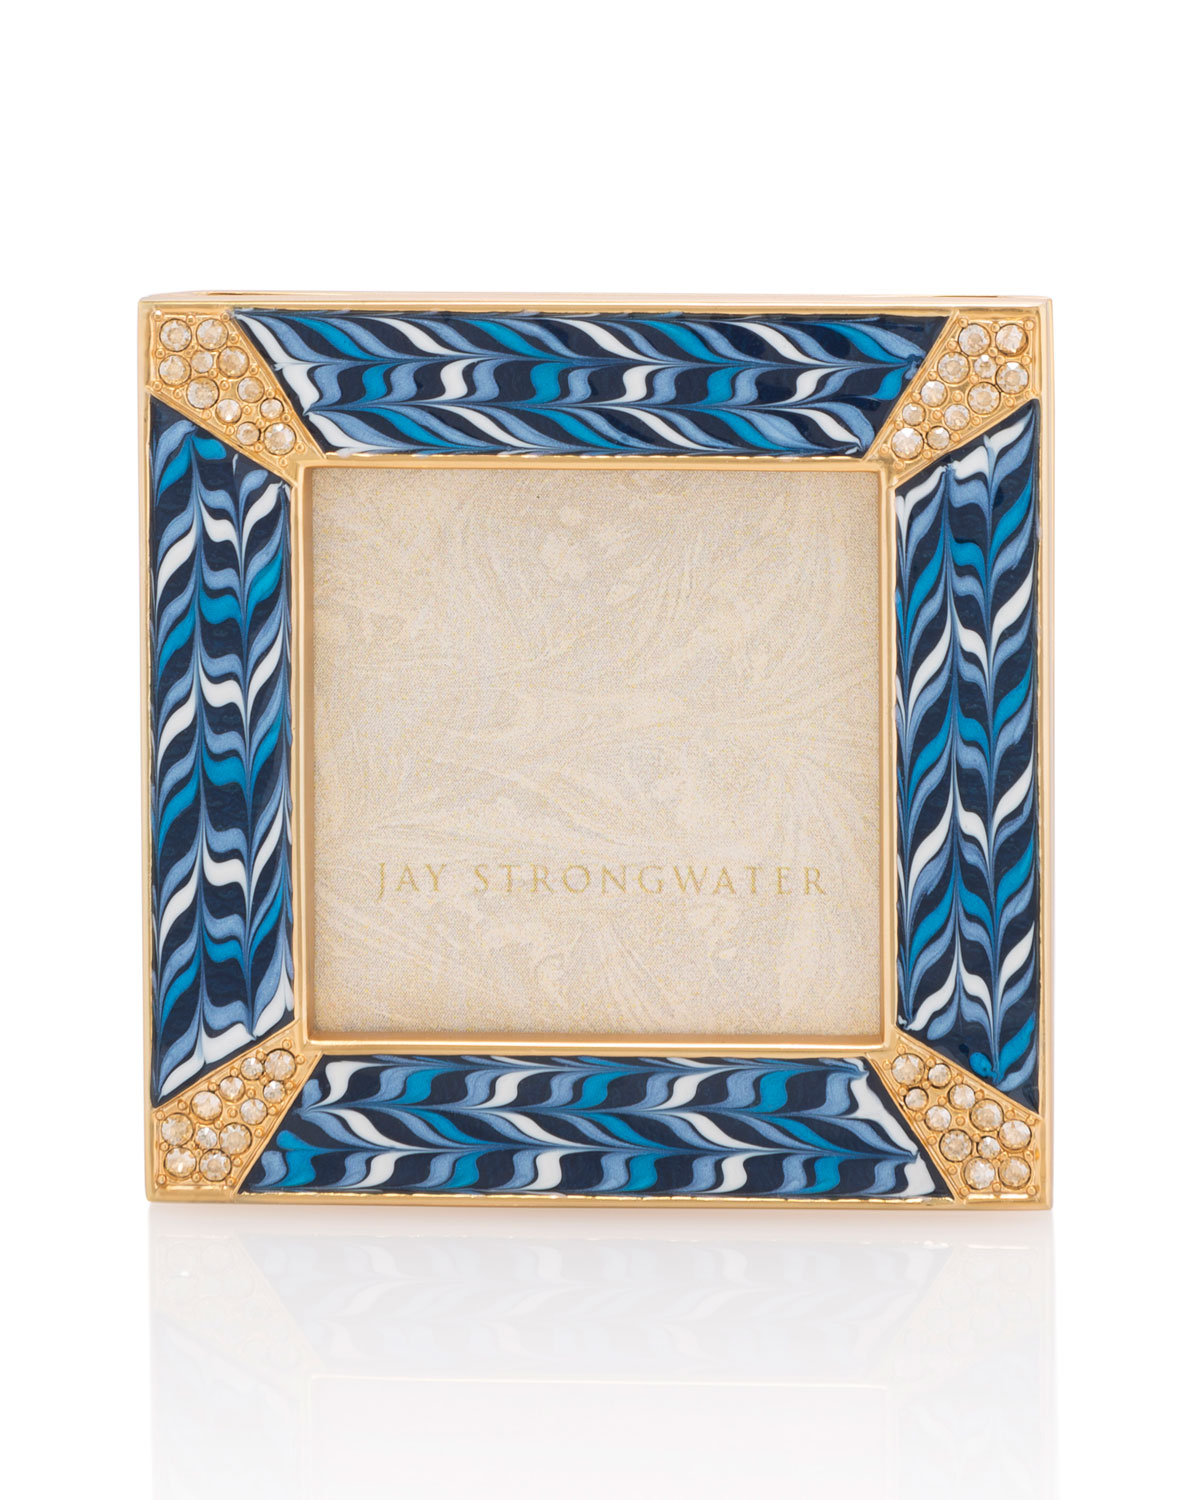 JAY STRONGWATER PAVE CORNER 2" SQUARE PICTURE FRAME, INDIGO,PROD136760033